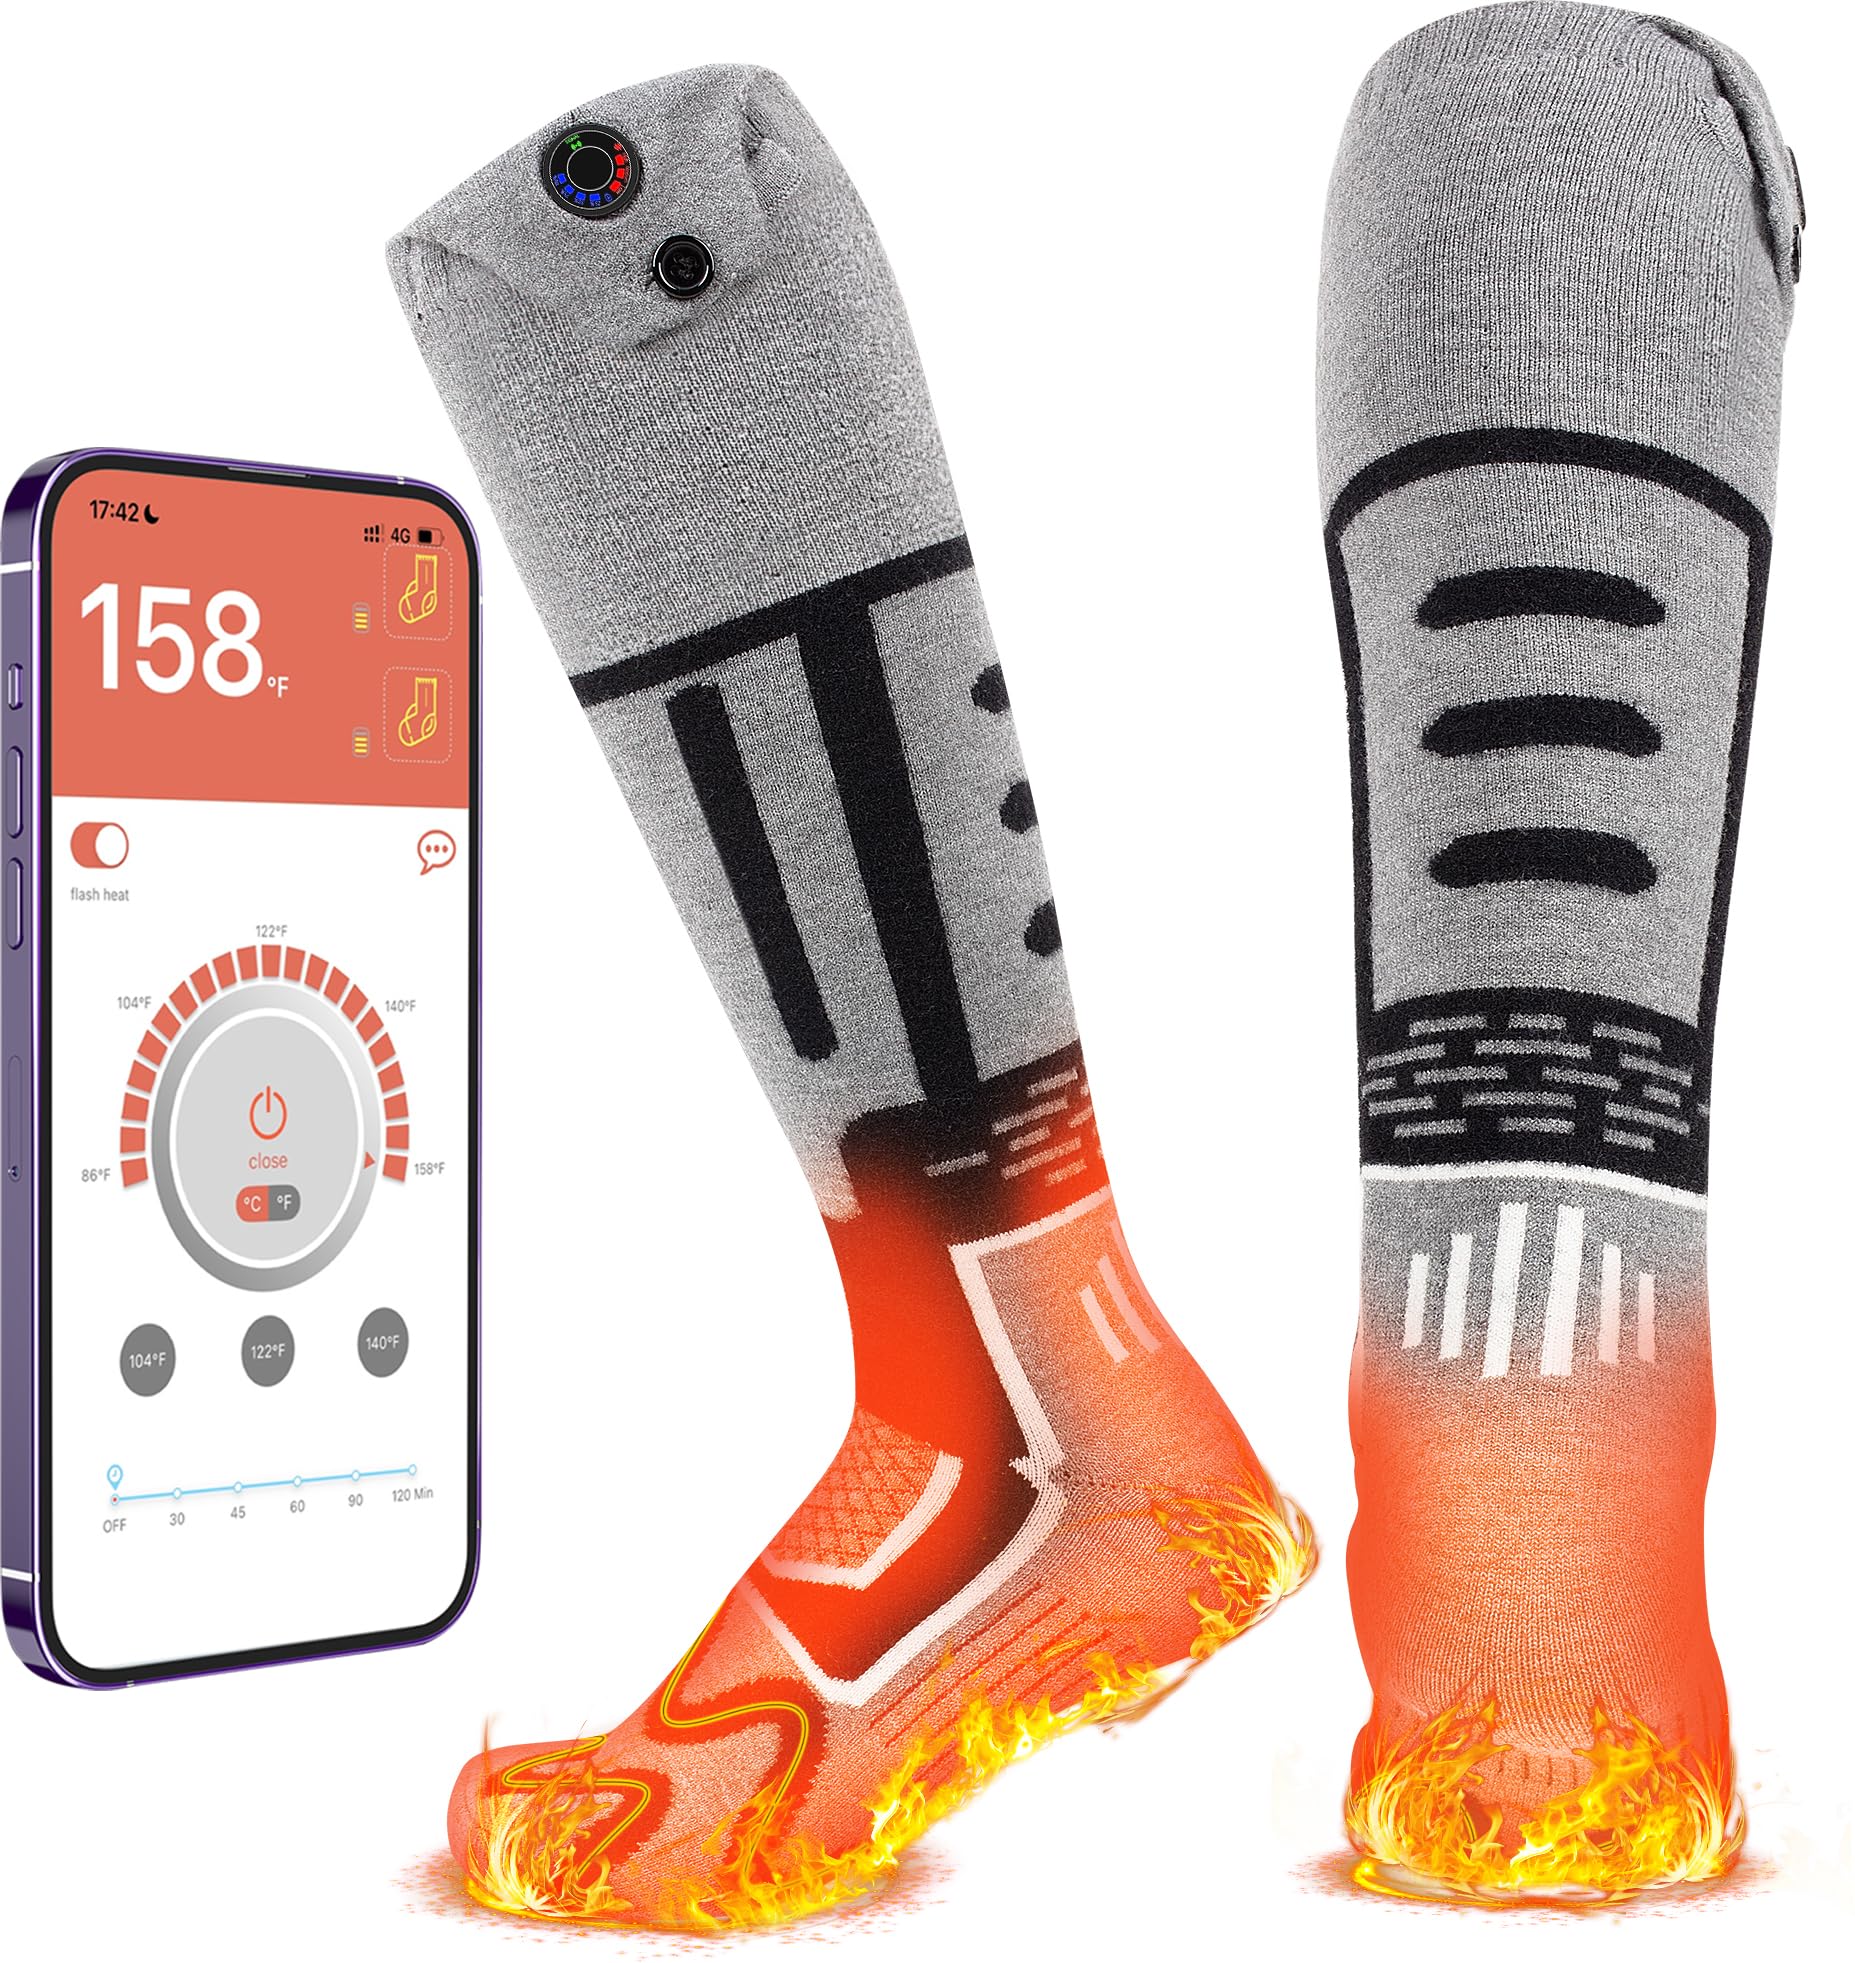 RELIRELIA Heated Socks，Heated Socks for Women/Men Rechargeable with APP Control 7.4V 6000mAh Battery Powered Foot Warmers for Winter Hunti